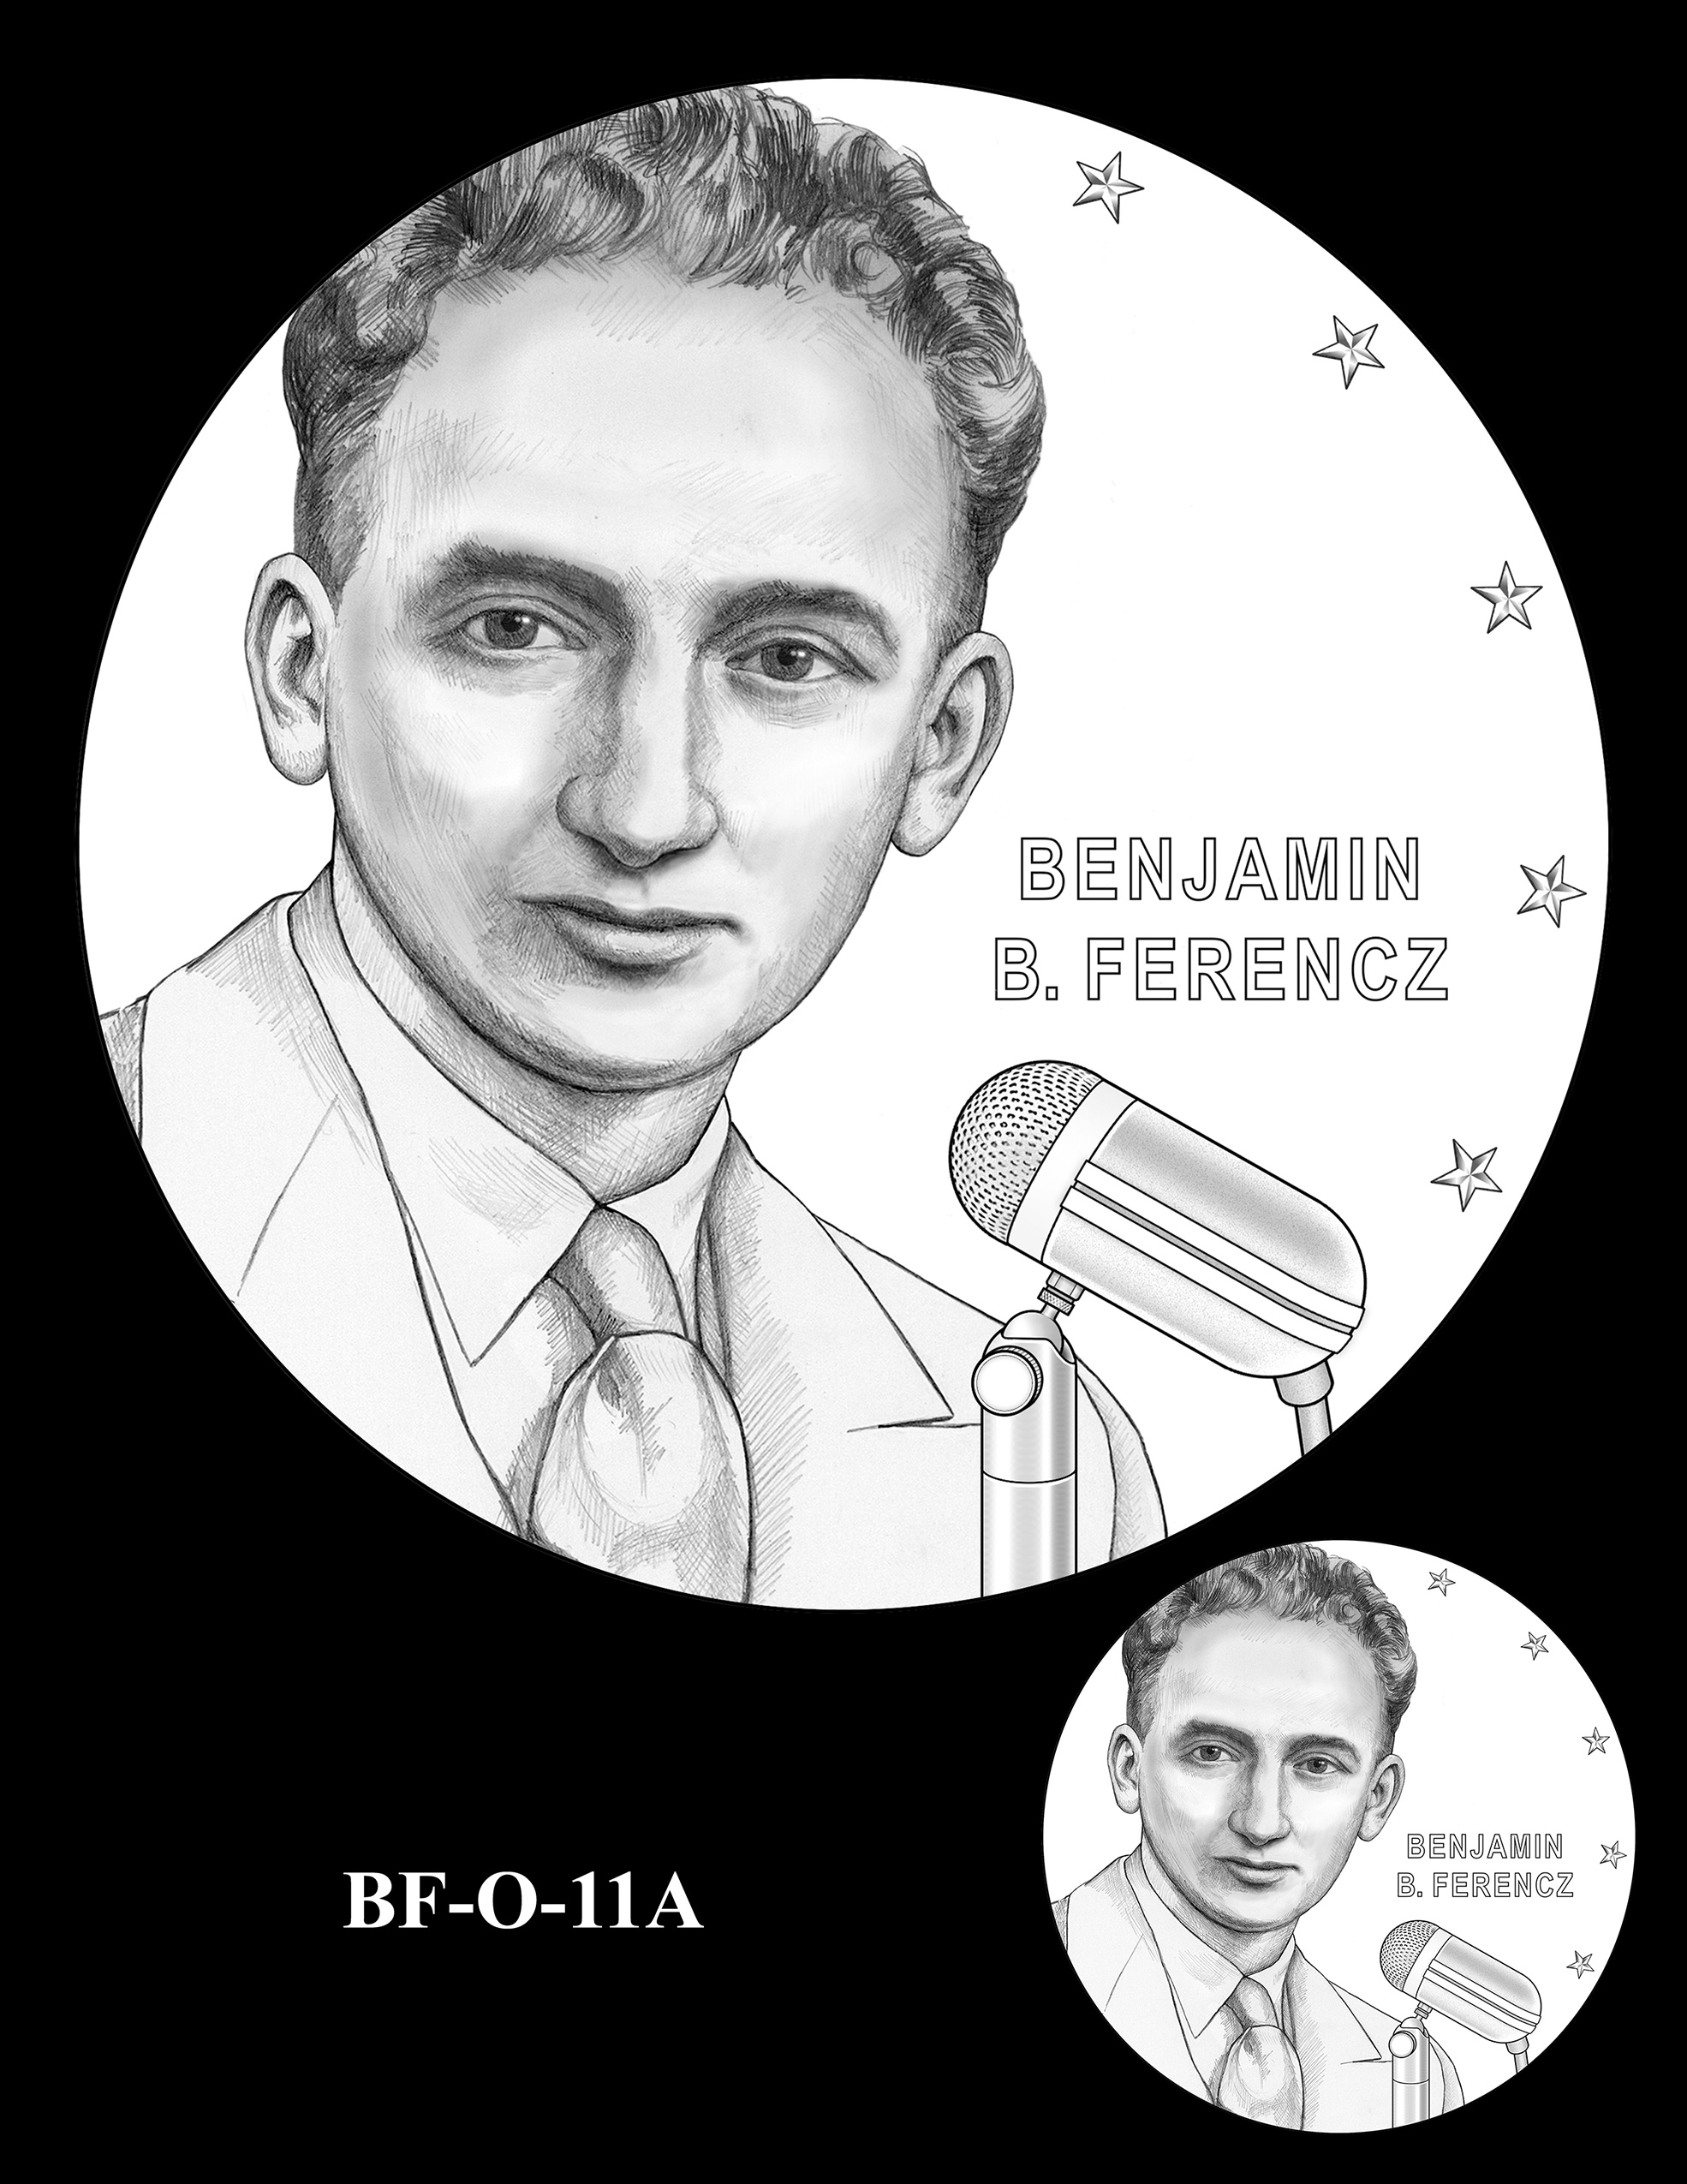 BF-O-11A -- Benjamin Ferencz Congressional Gold Medal